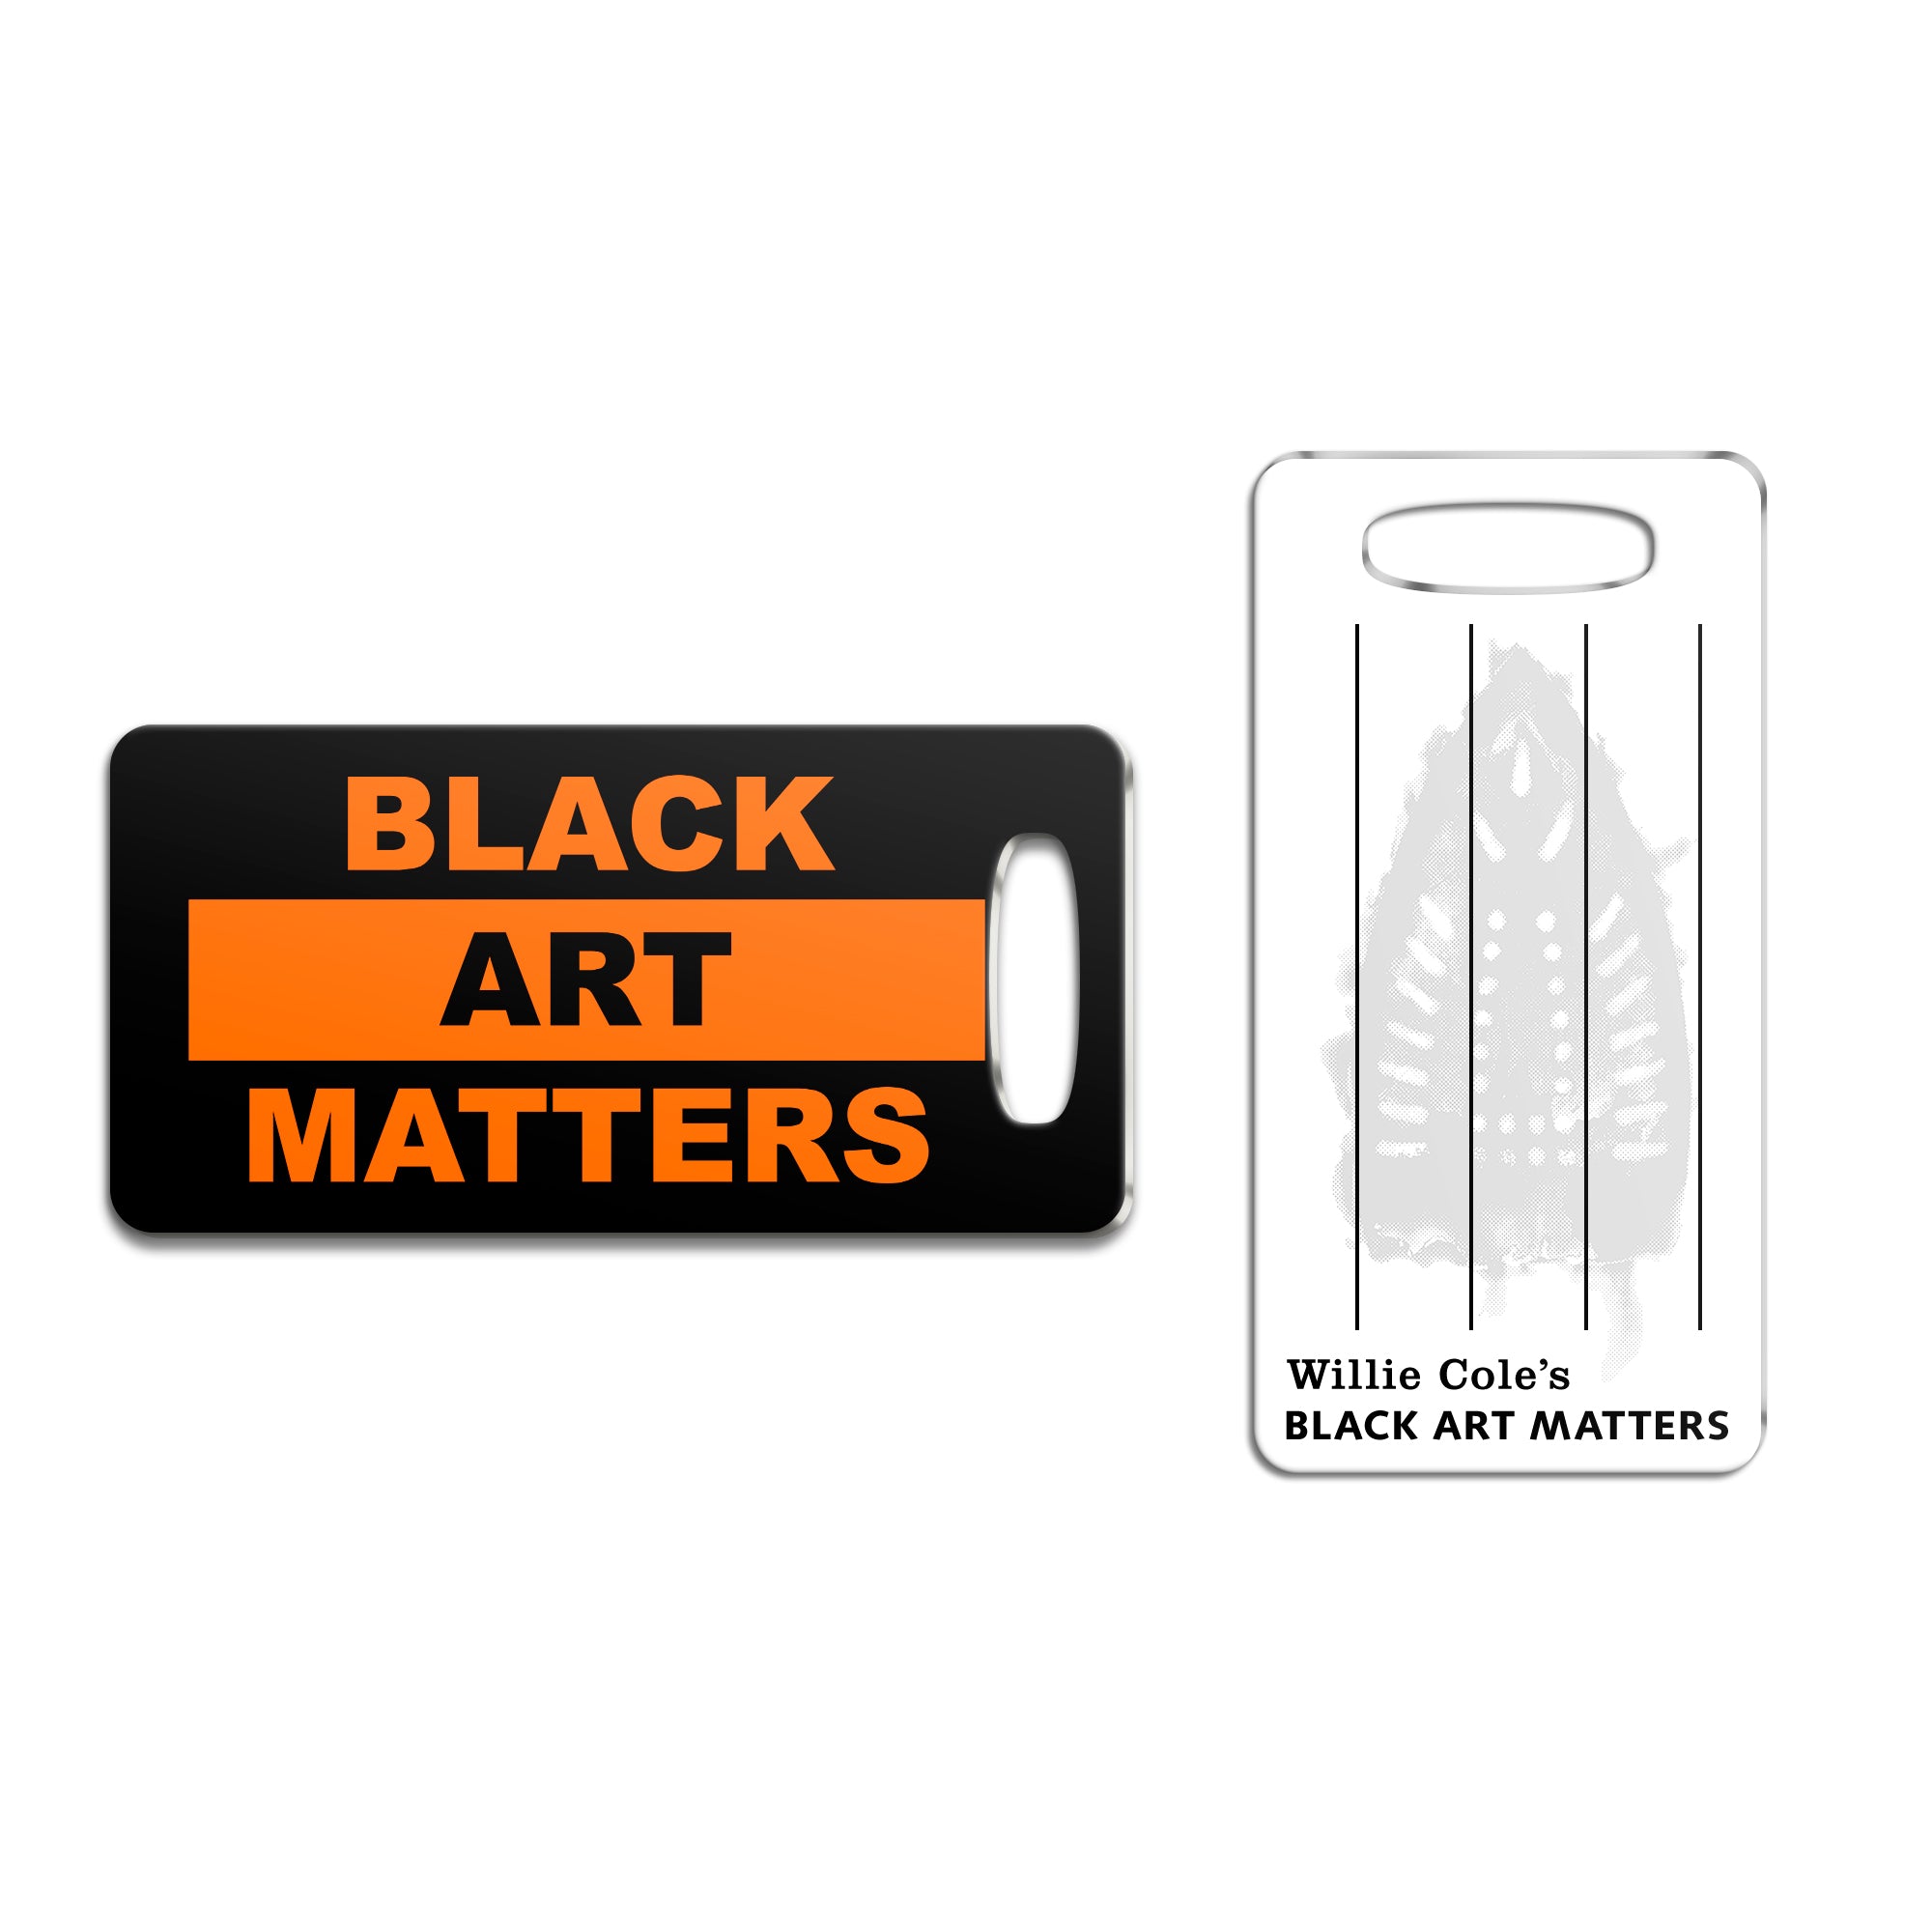 Willie Cole Black Art Matters Luggage Tag